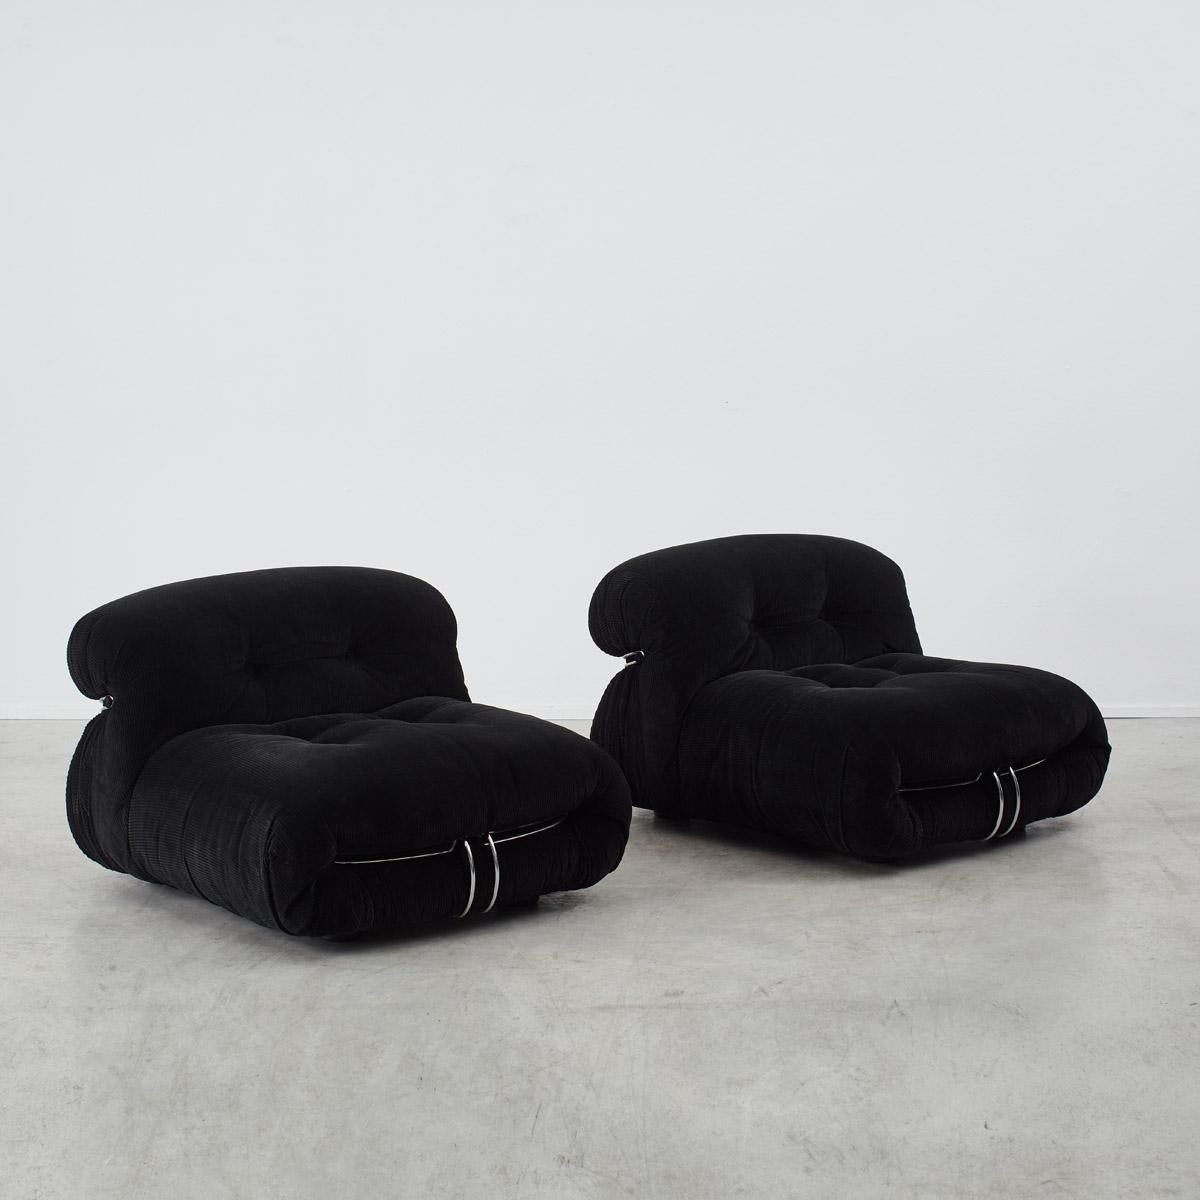 Winner of the Compasso d’Oro award in 1970, the Soriana led Italian couple Afra and Tobia Scarpa to instant success. Together in 1968 they designed a pair of cloud-like chairs for low-slung lounging. An original concept, the fully stuffed seats